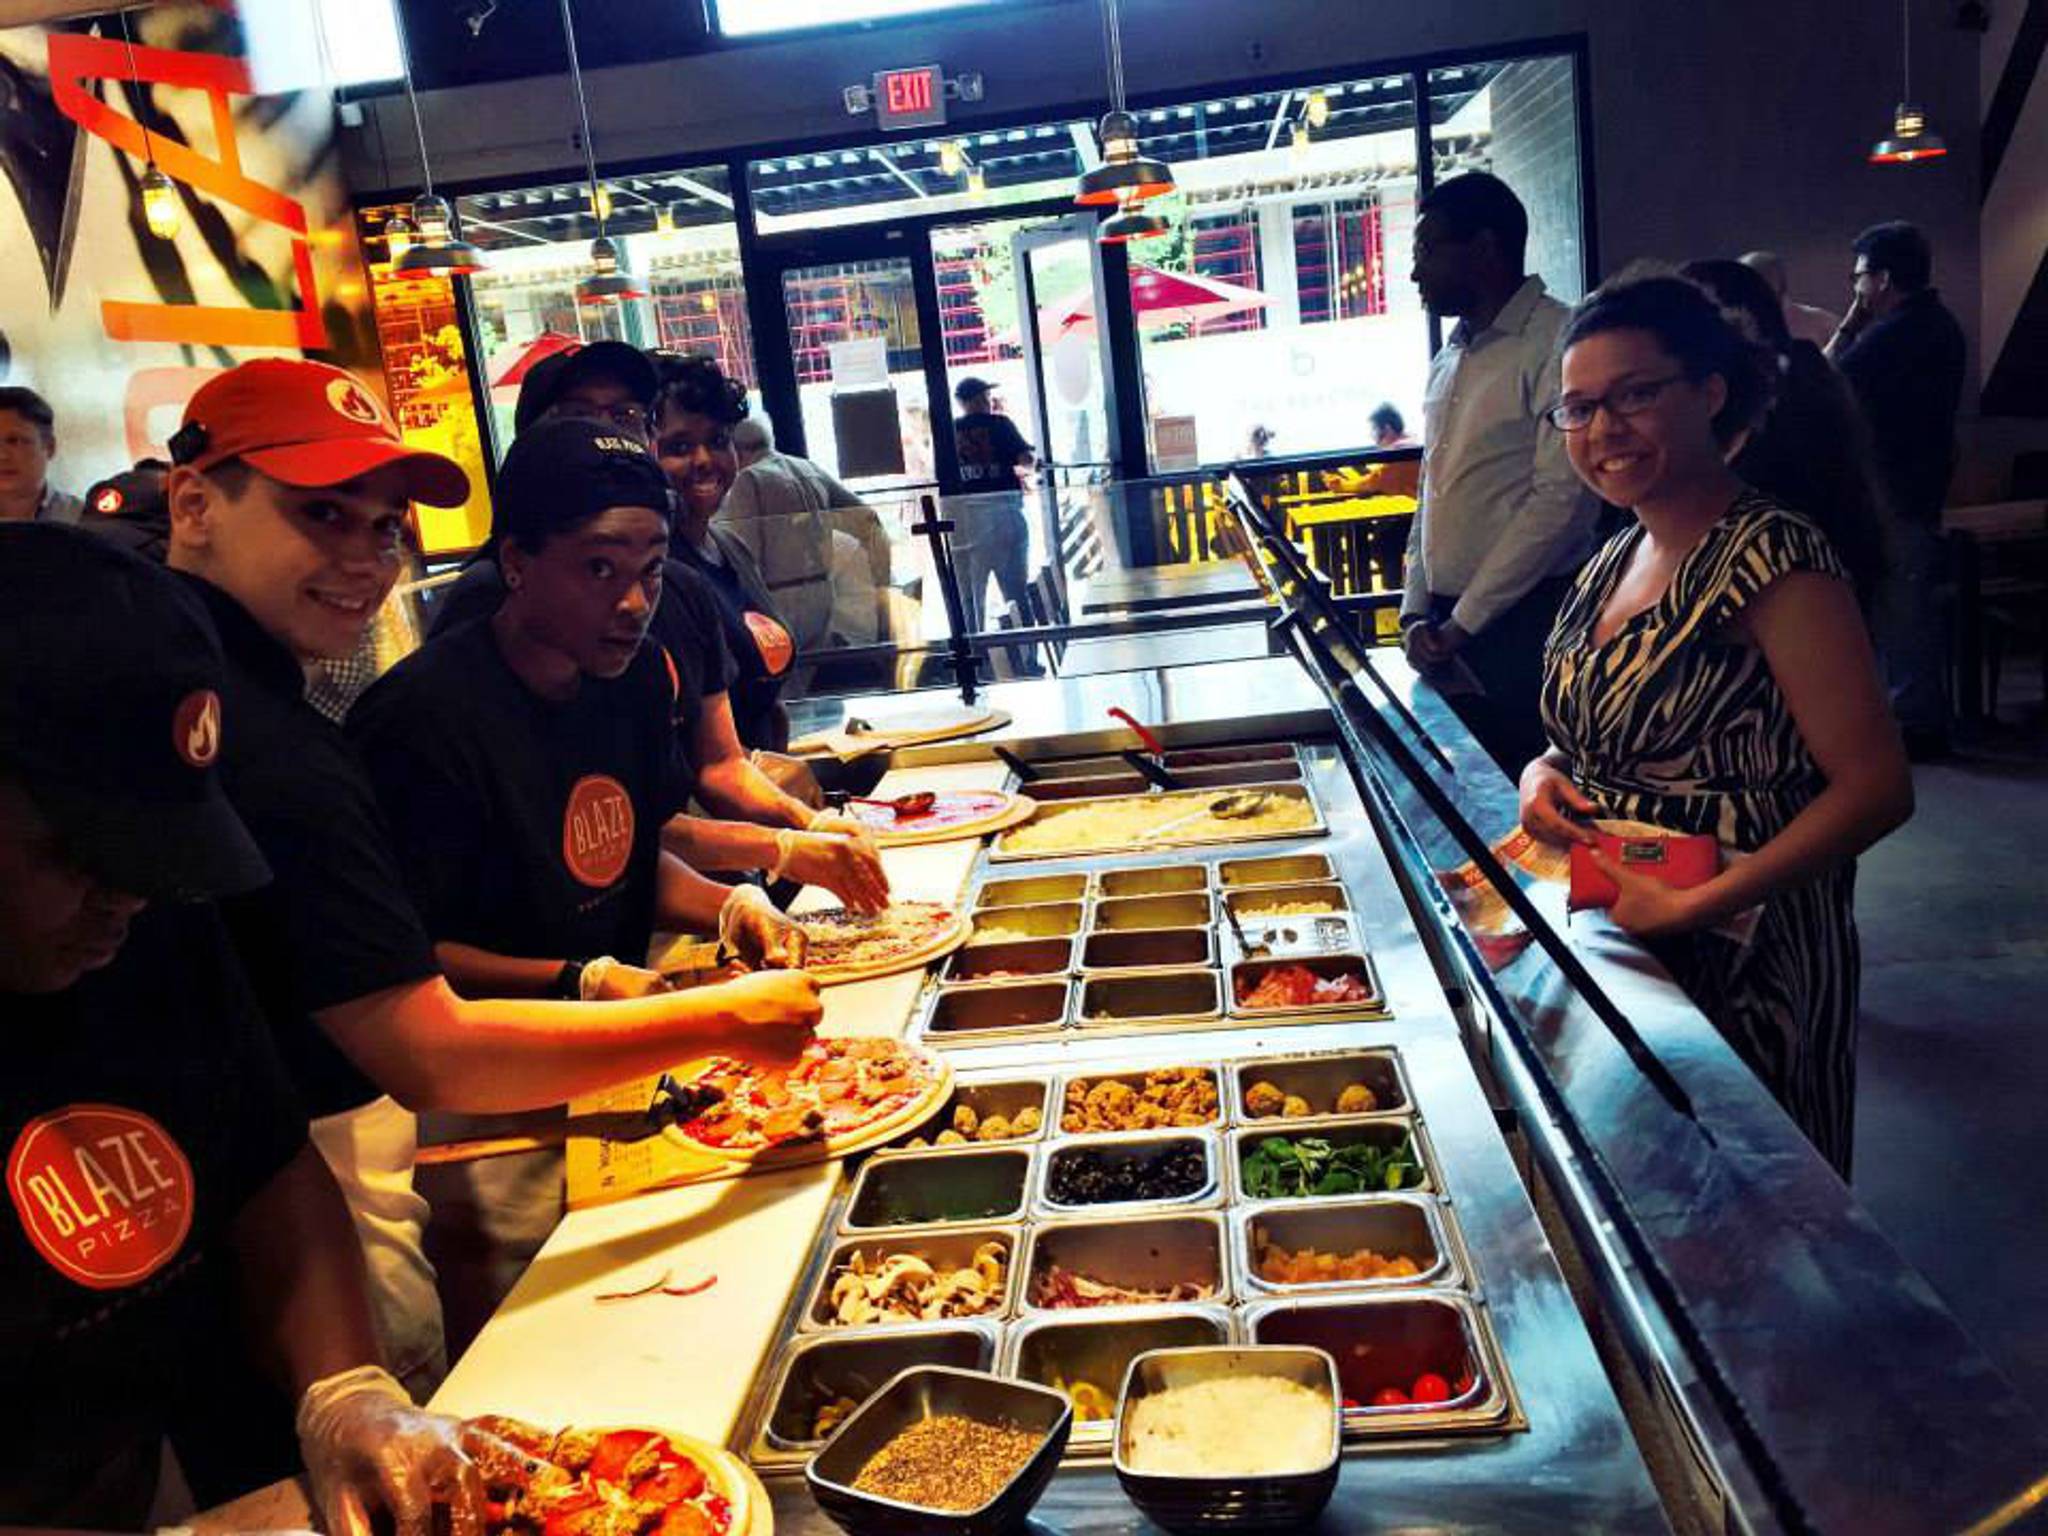 Fast casual diners want to build their own meal